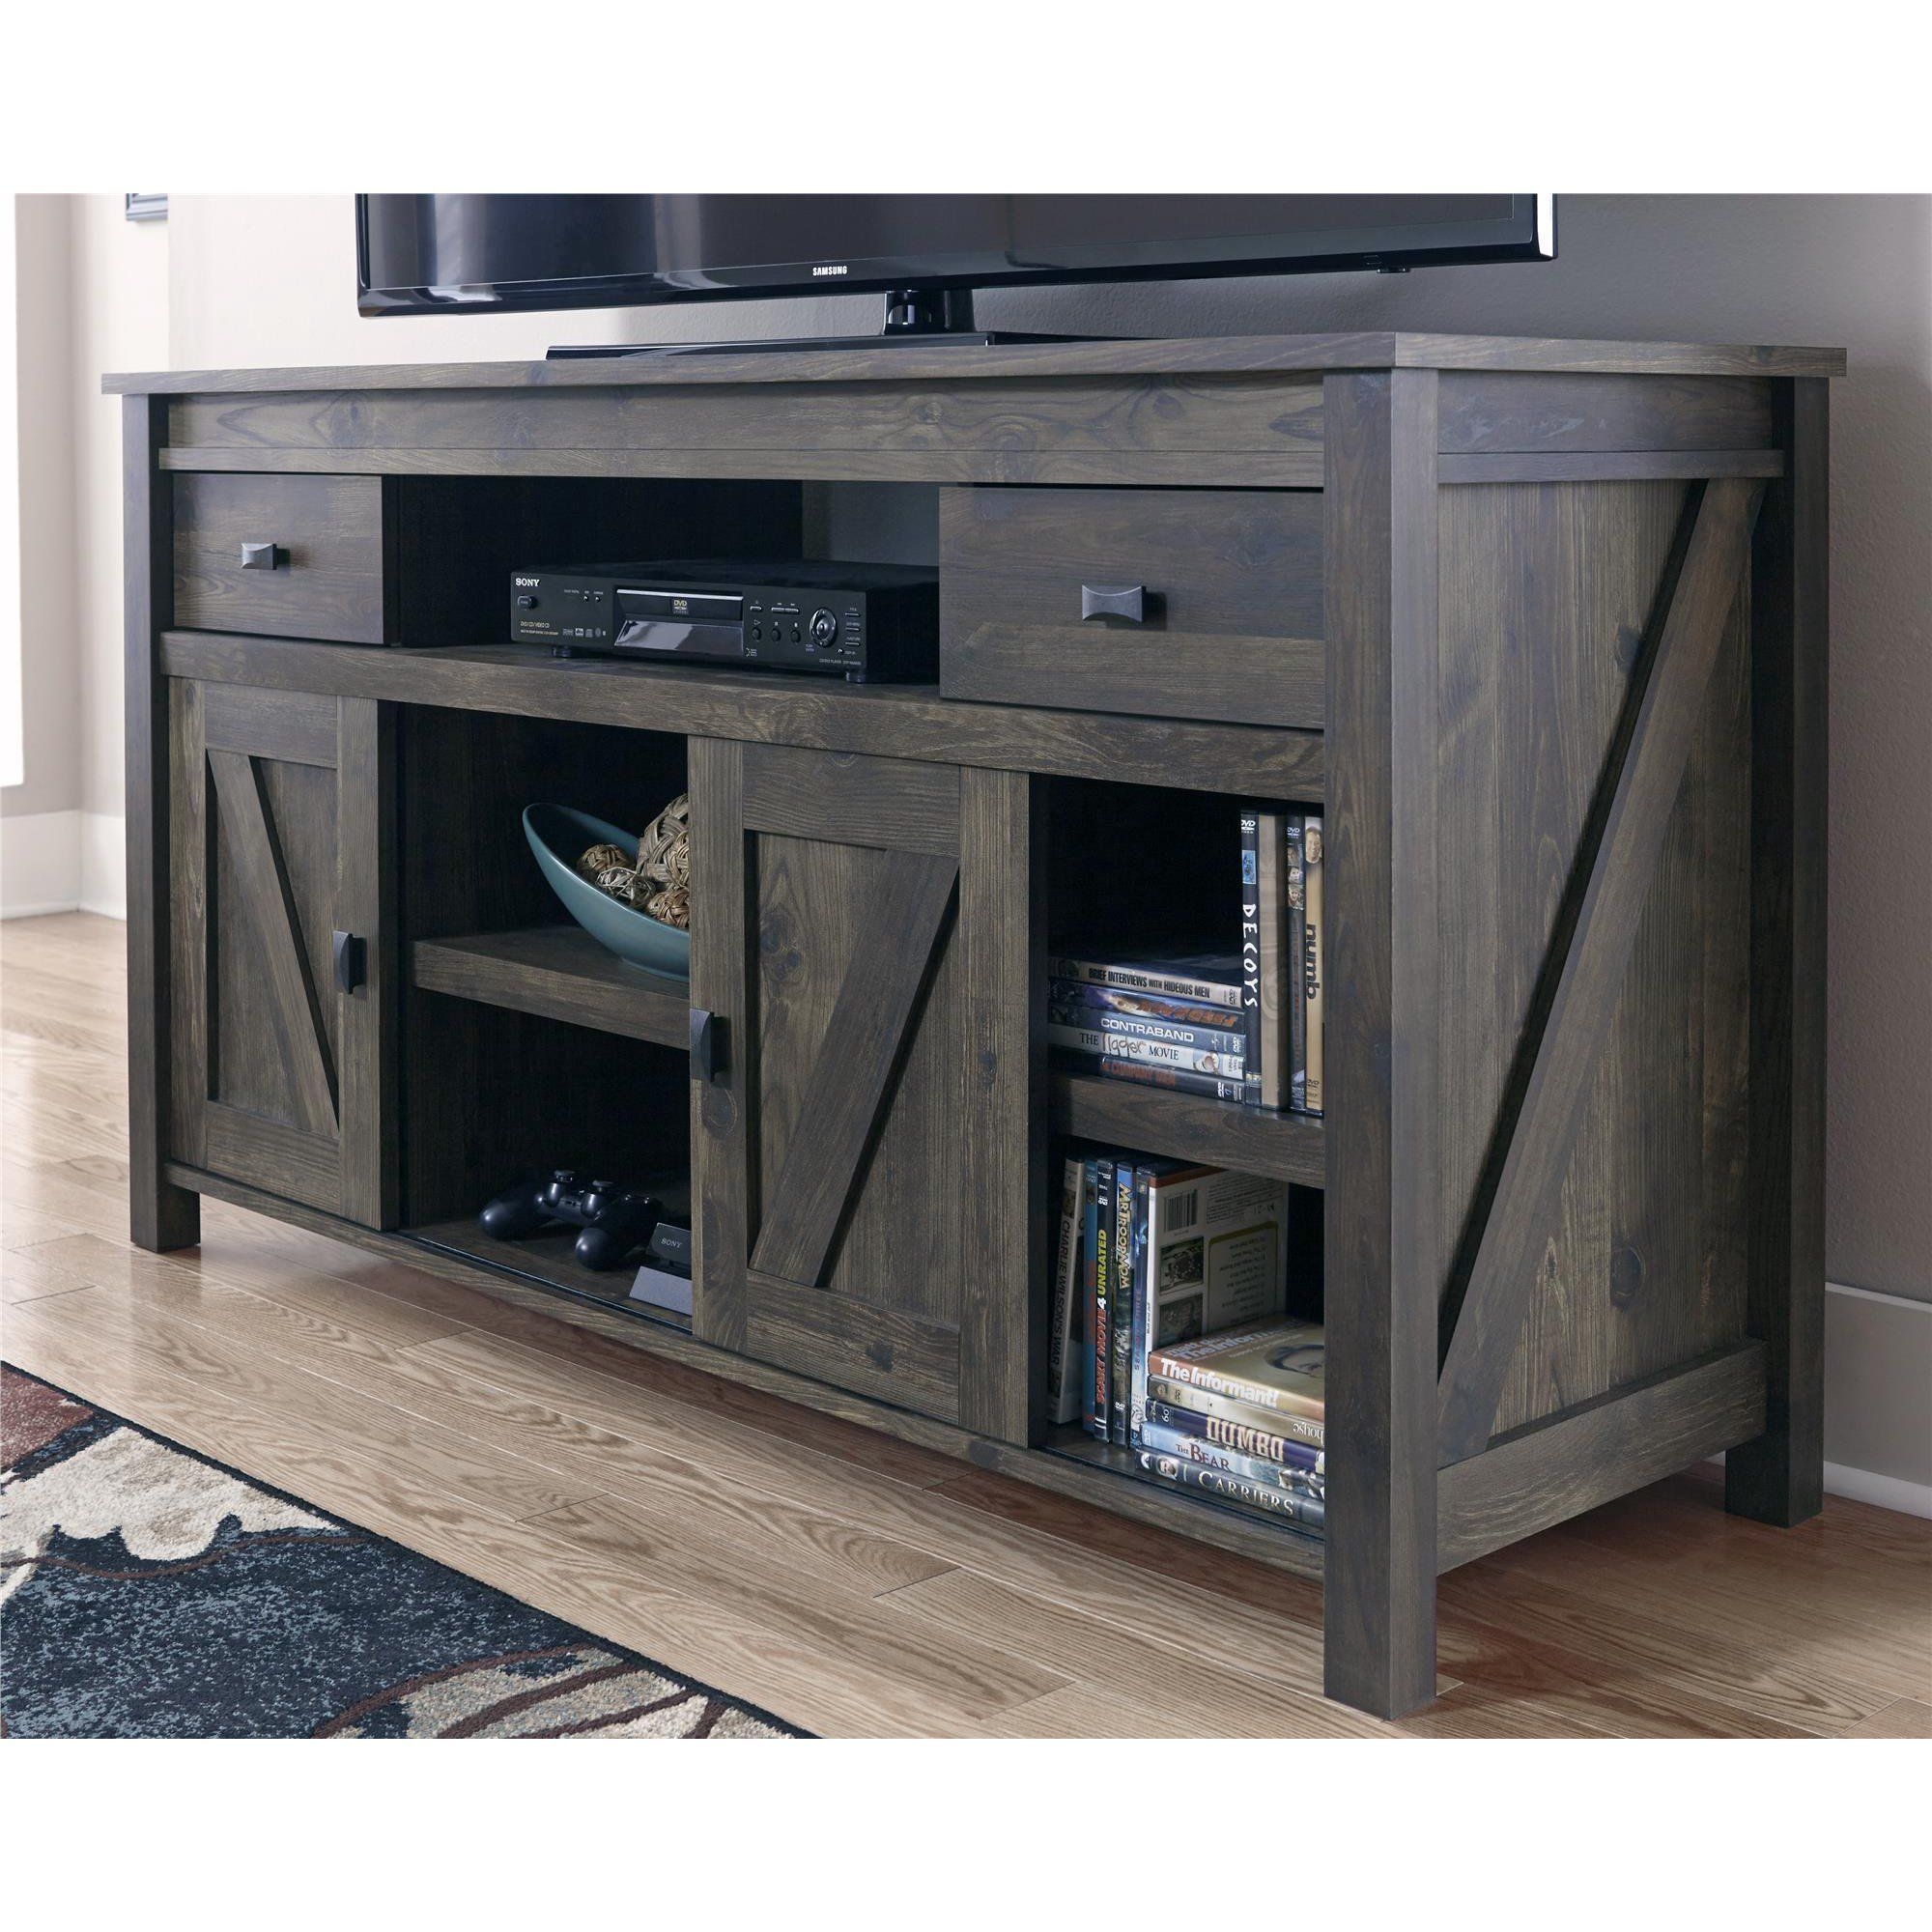 Woven Paths Scandi Farmhouse Tv Stand For Tvs Up To 60 Pertaining To Woven Paths Barn Door Tv Stands In Multiple Finishes (Photo 15 of 15)